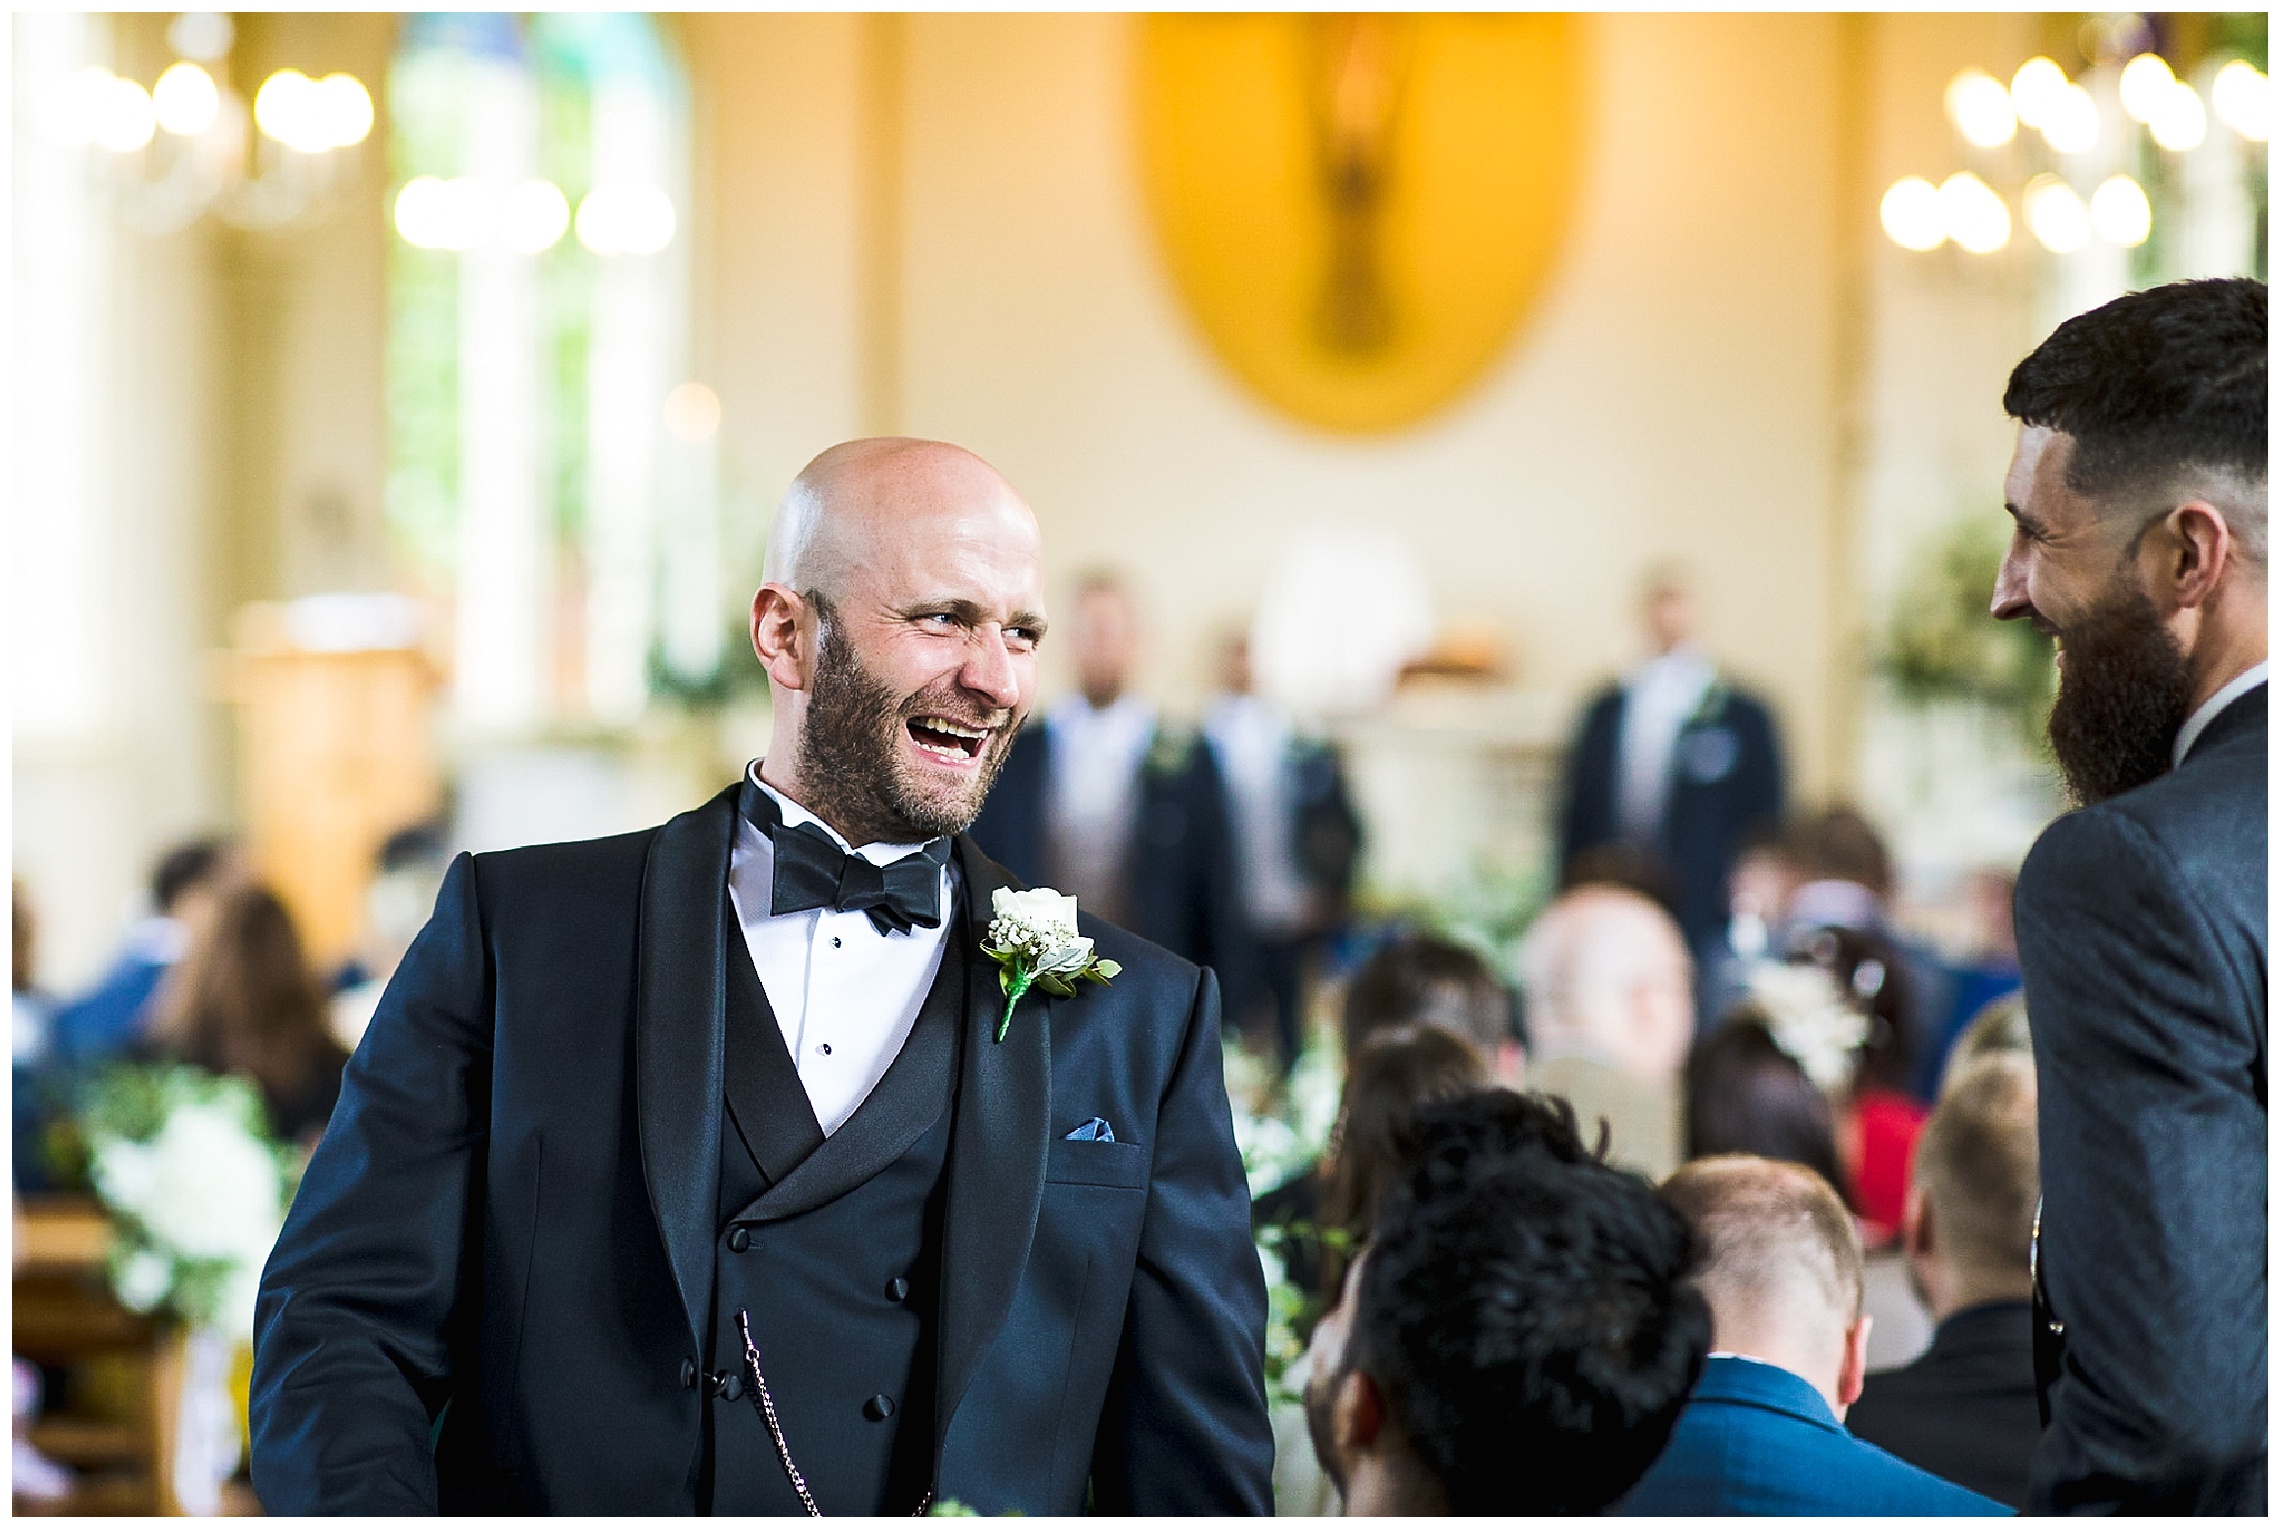 groom laughing at end of aisle, in bow tie and tuxedo suit